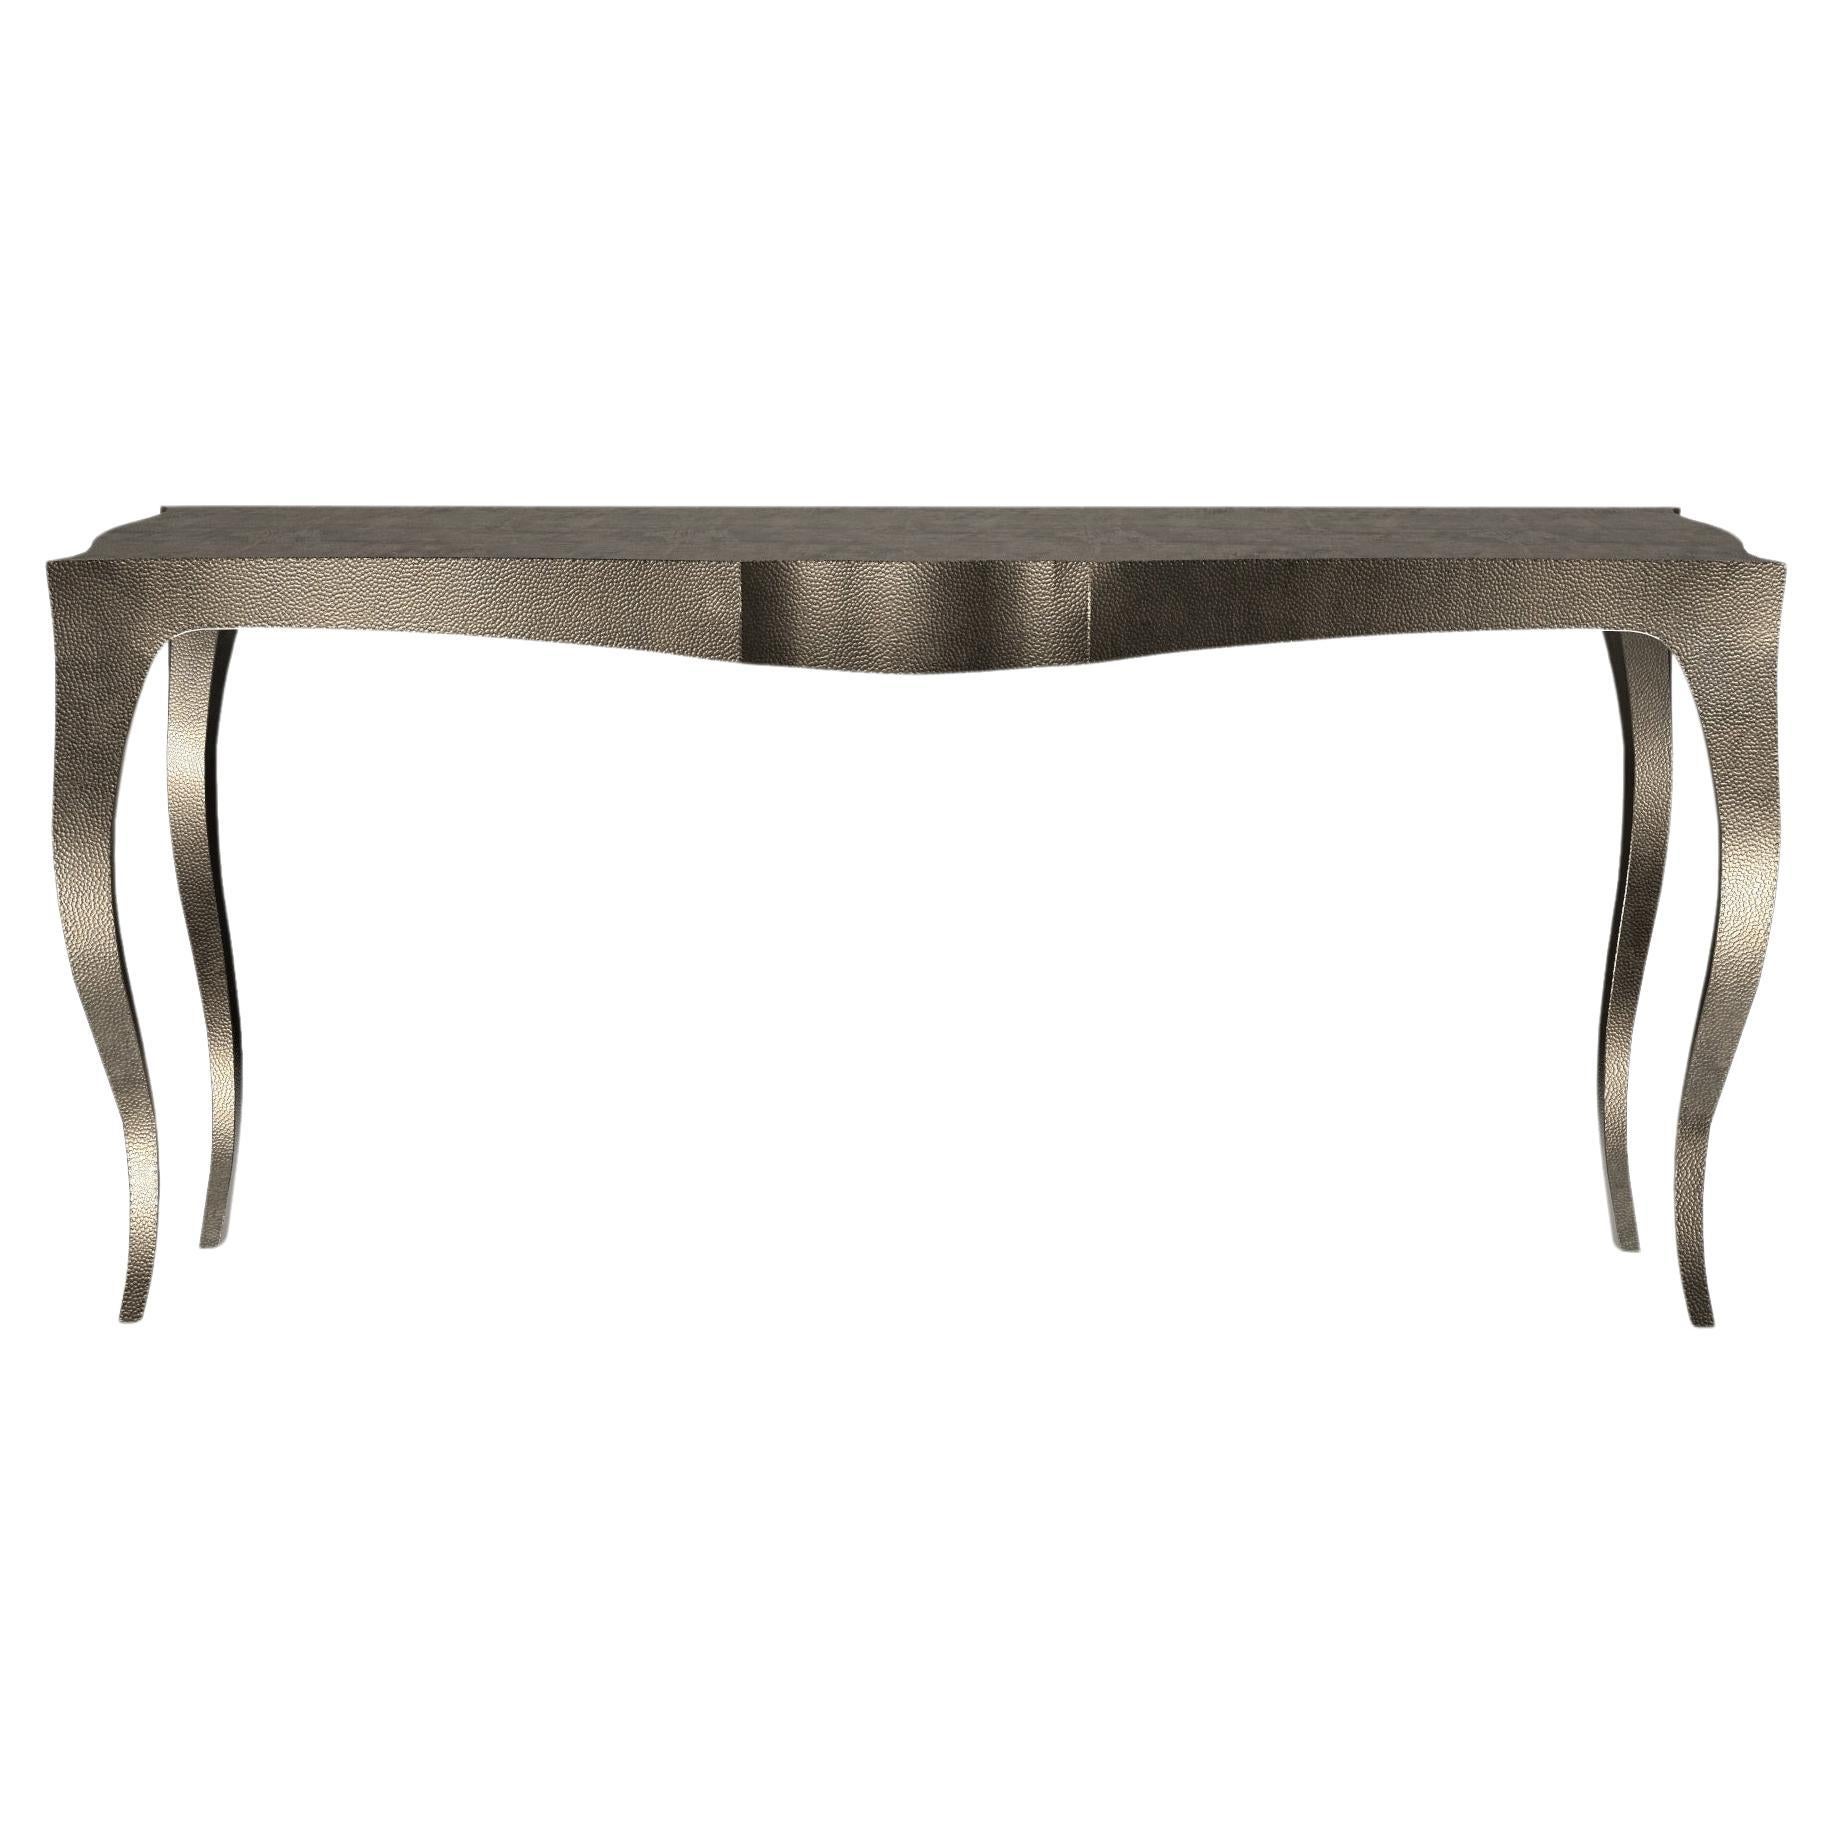 Louise Console Art Deco Industrial and Work Tables Mid. Hammered Antique Bronze For Sale